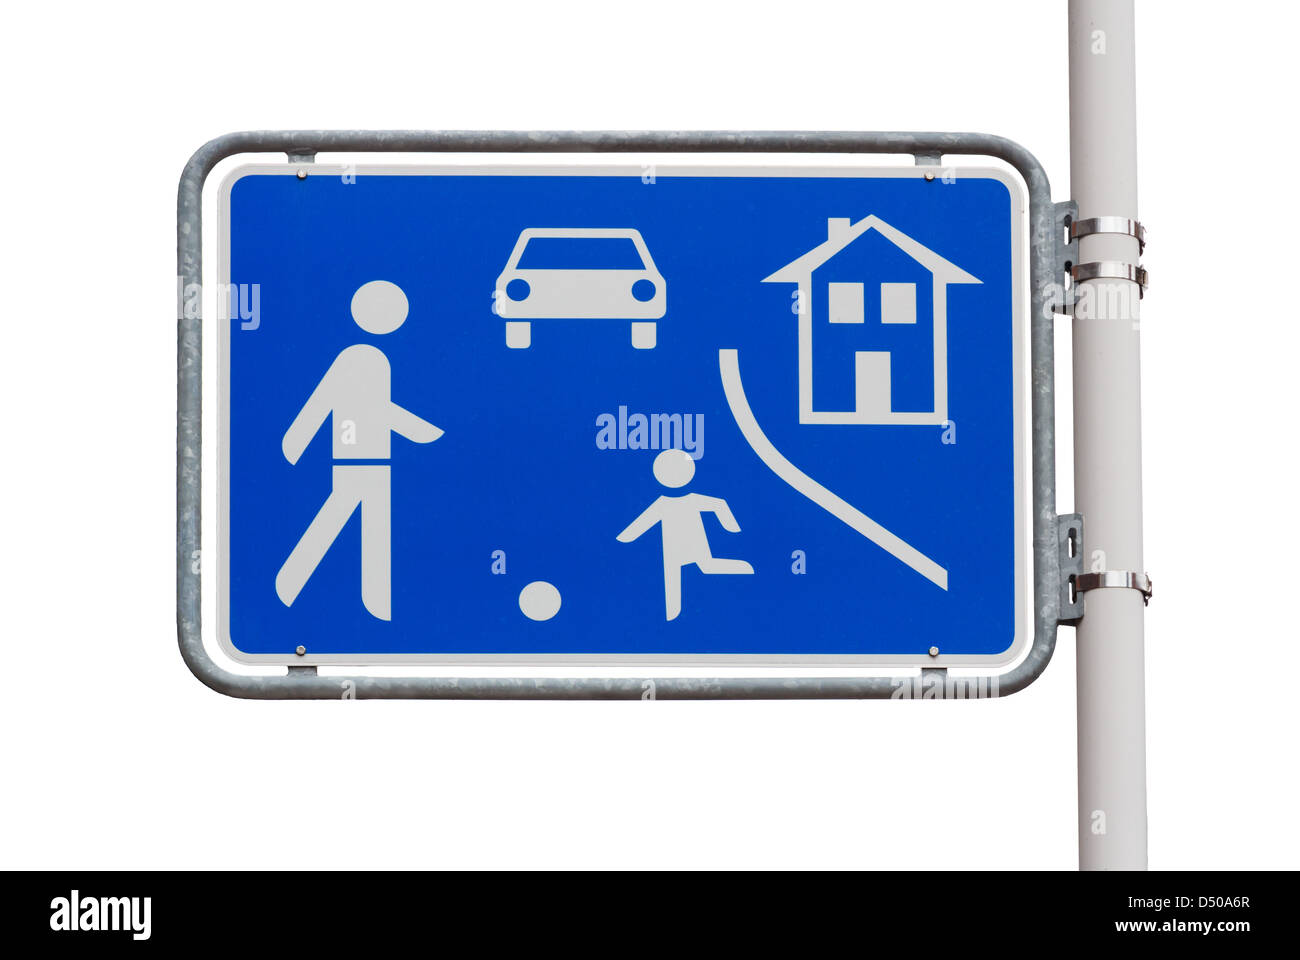 Home zone entry road sign on white background Stock Photo